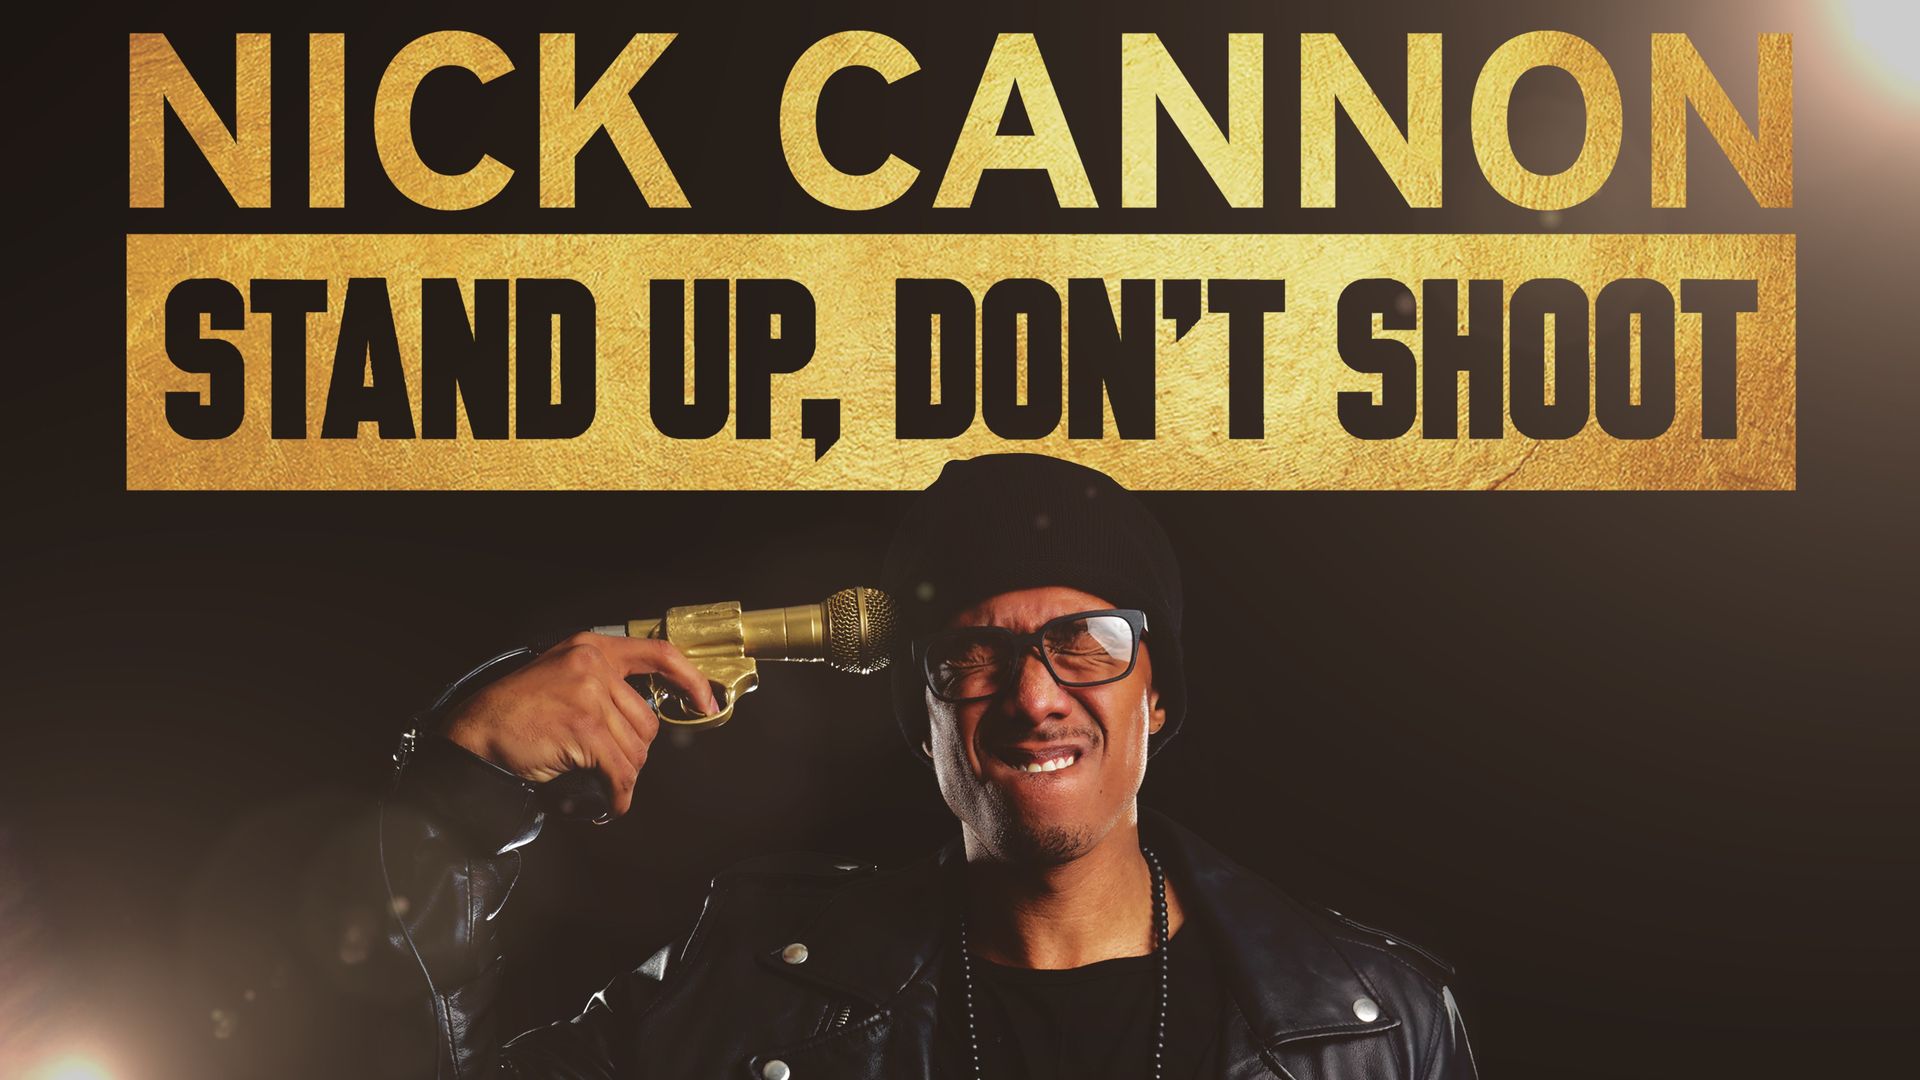 Nick Cannon: Stand Up, Don't Shoot Backdrop